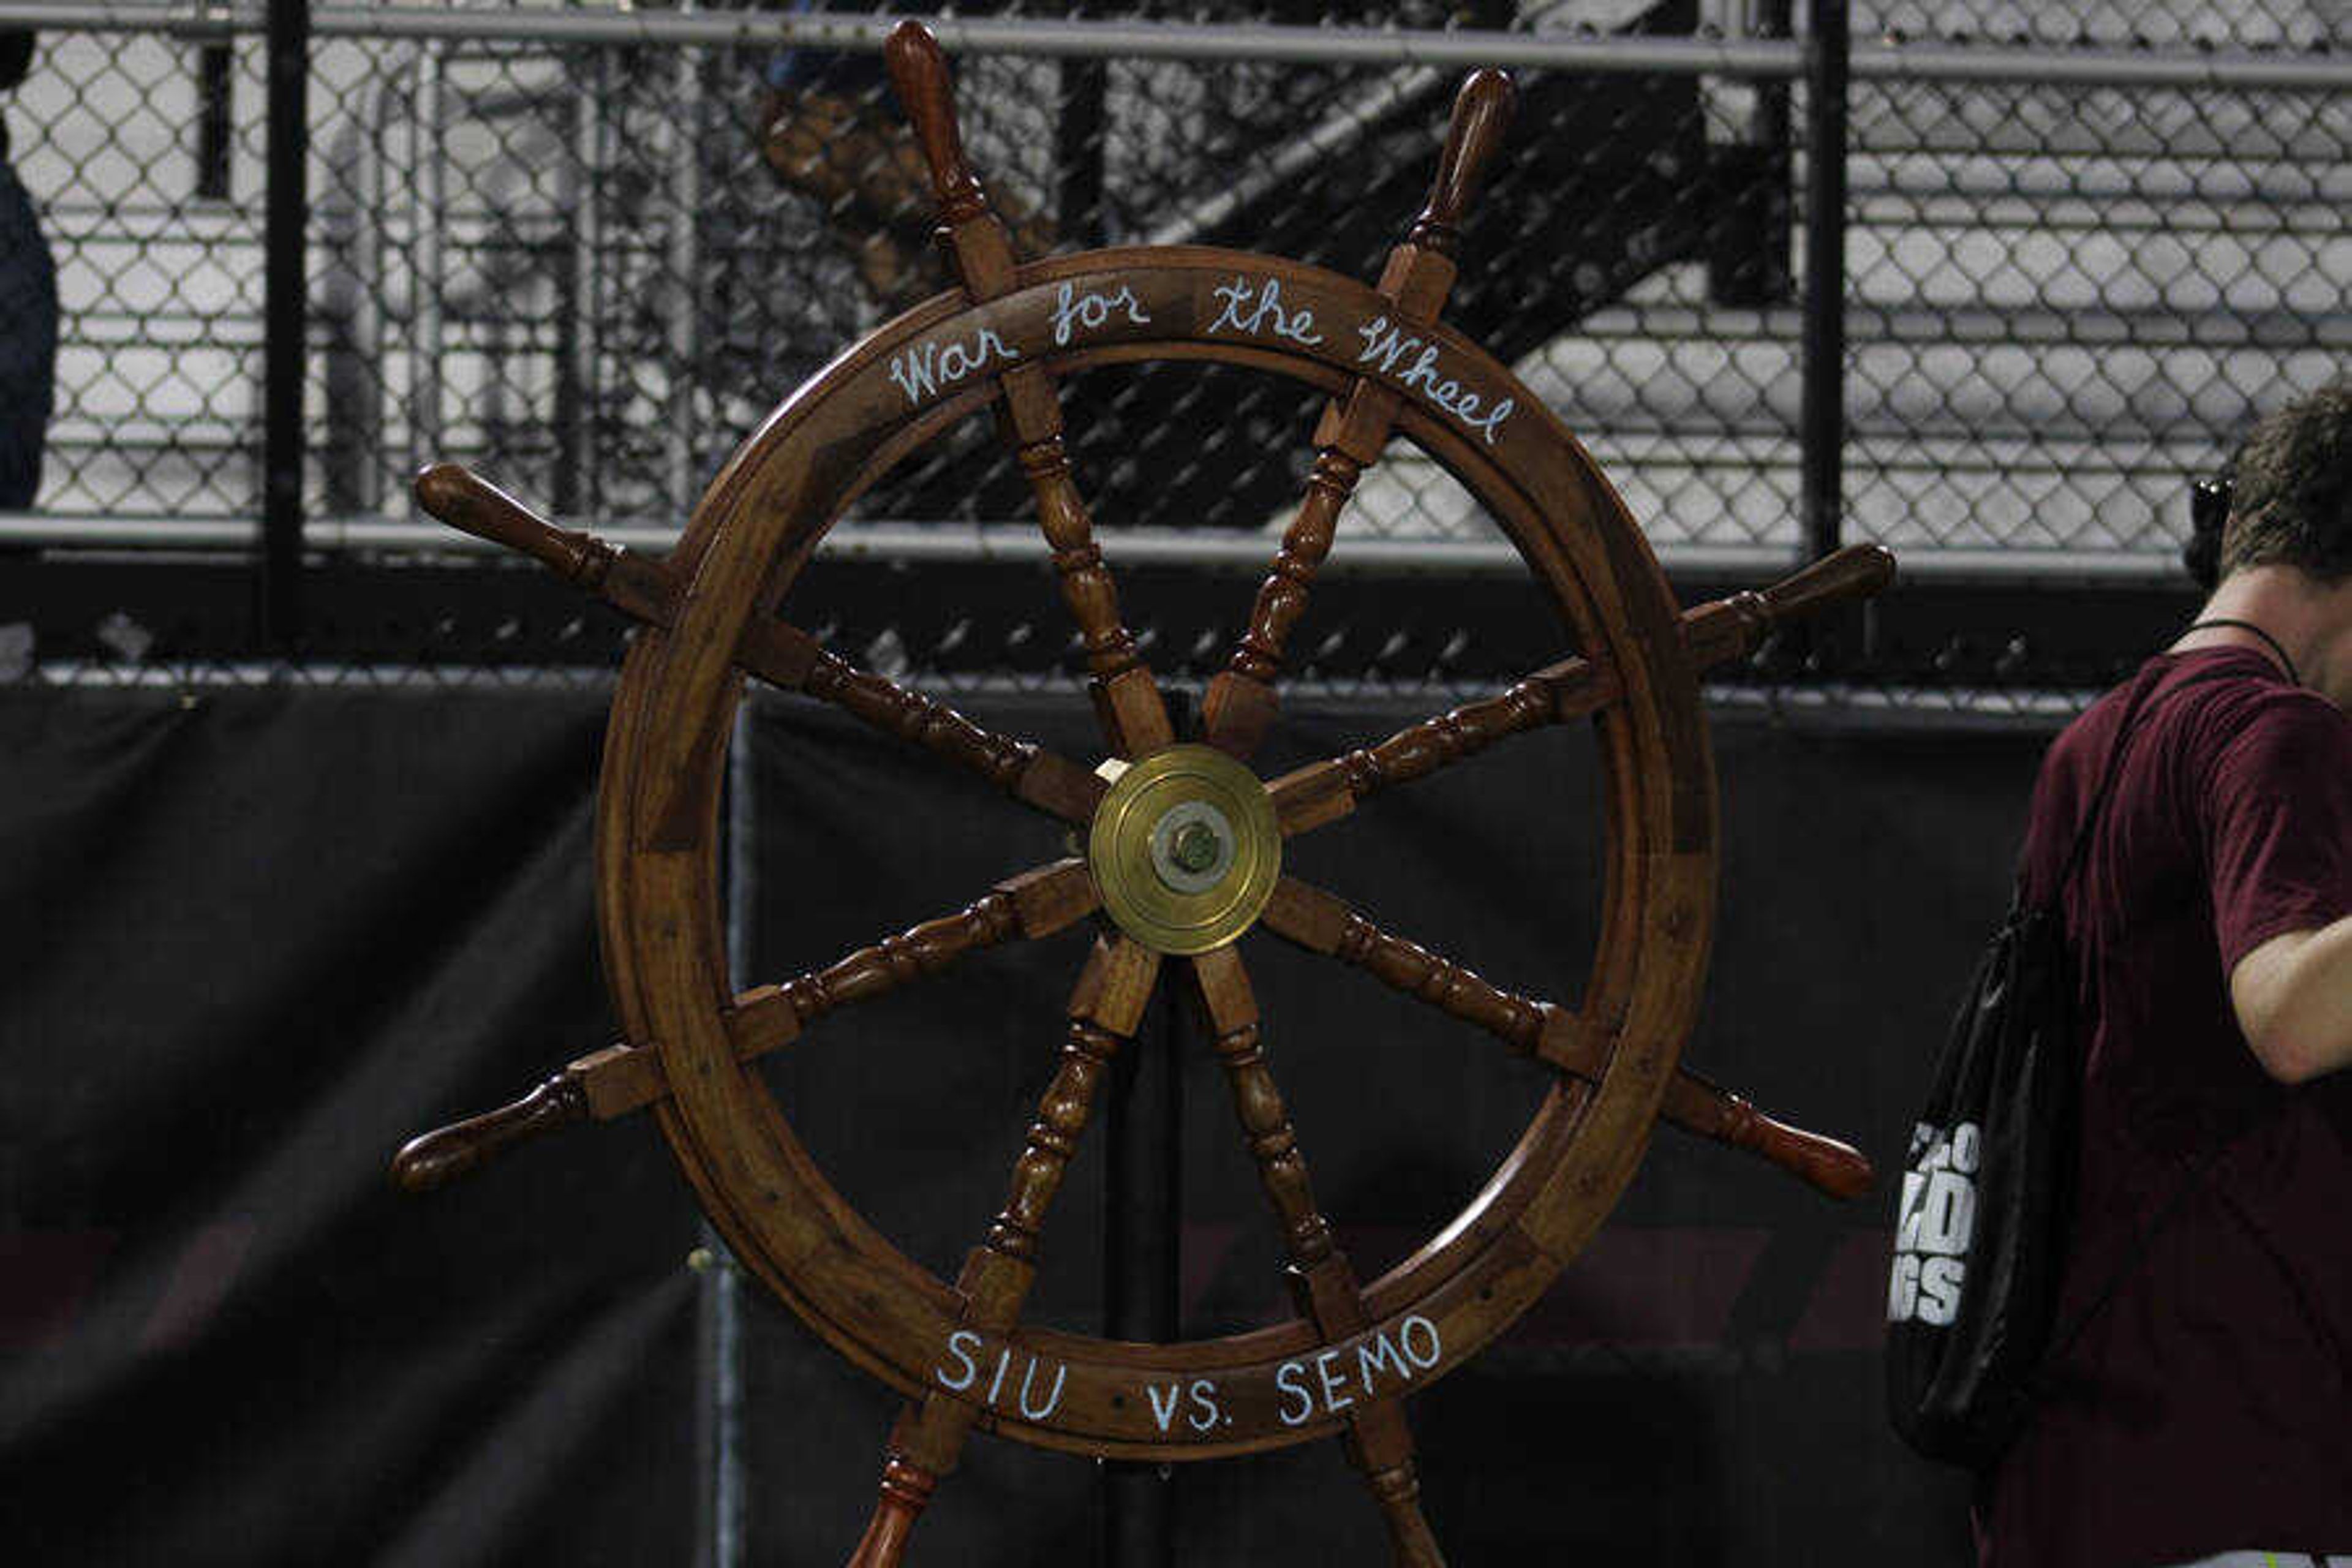 Southeast took home this antique ship wheel, which commemorates the 'War for the Wheel' rivalry matchup between SEMO and SIUC.